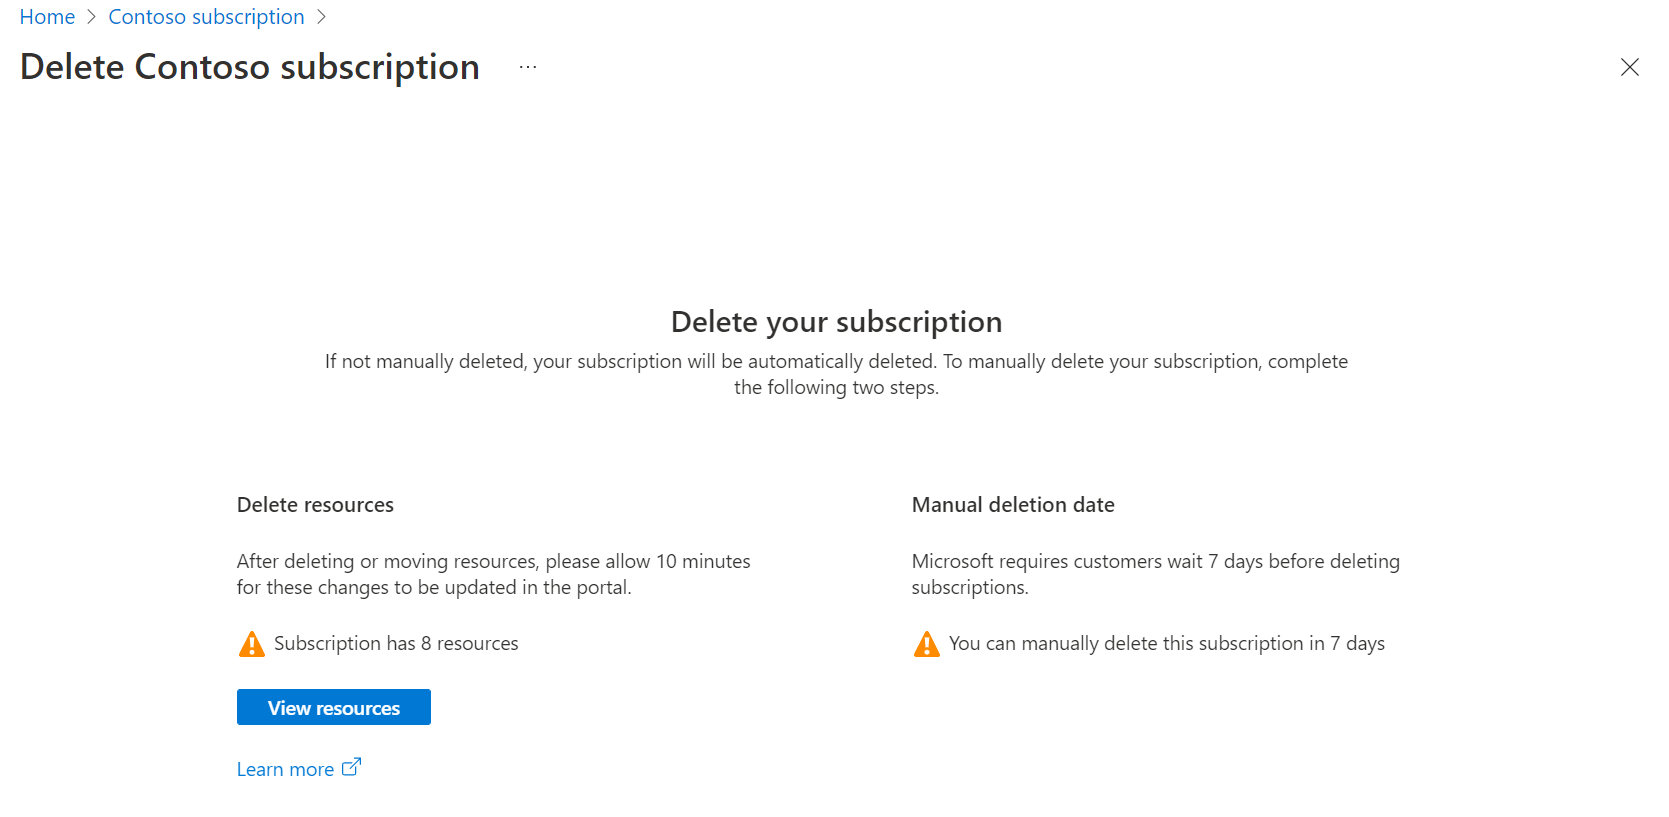 Screenshot showing the Delete your subscription page.